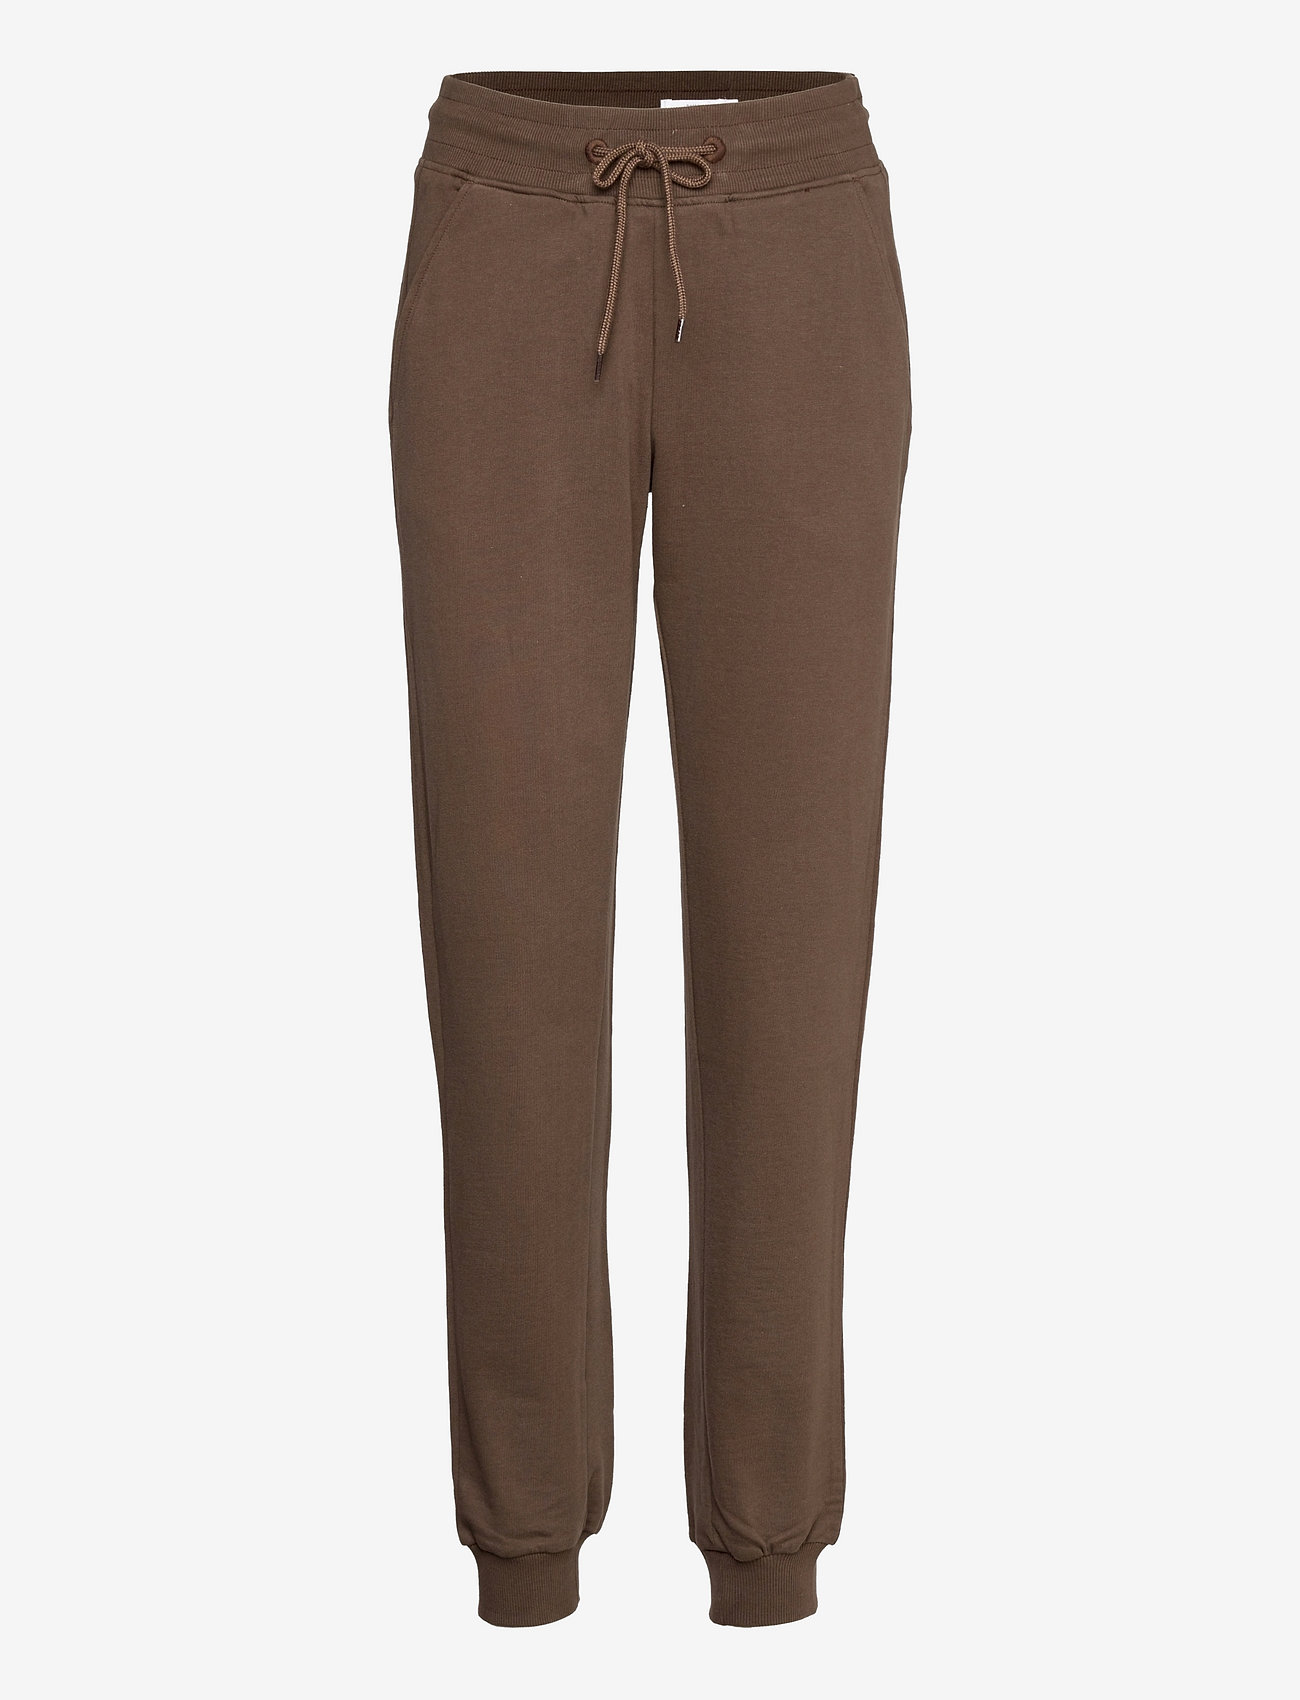 Bread & Boxers - Lounge pant - moterims - earth brown - 0